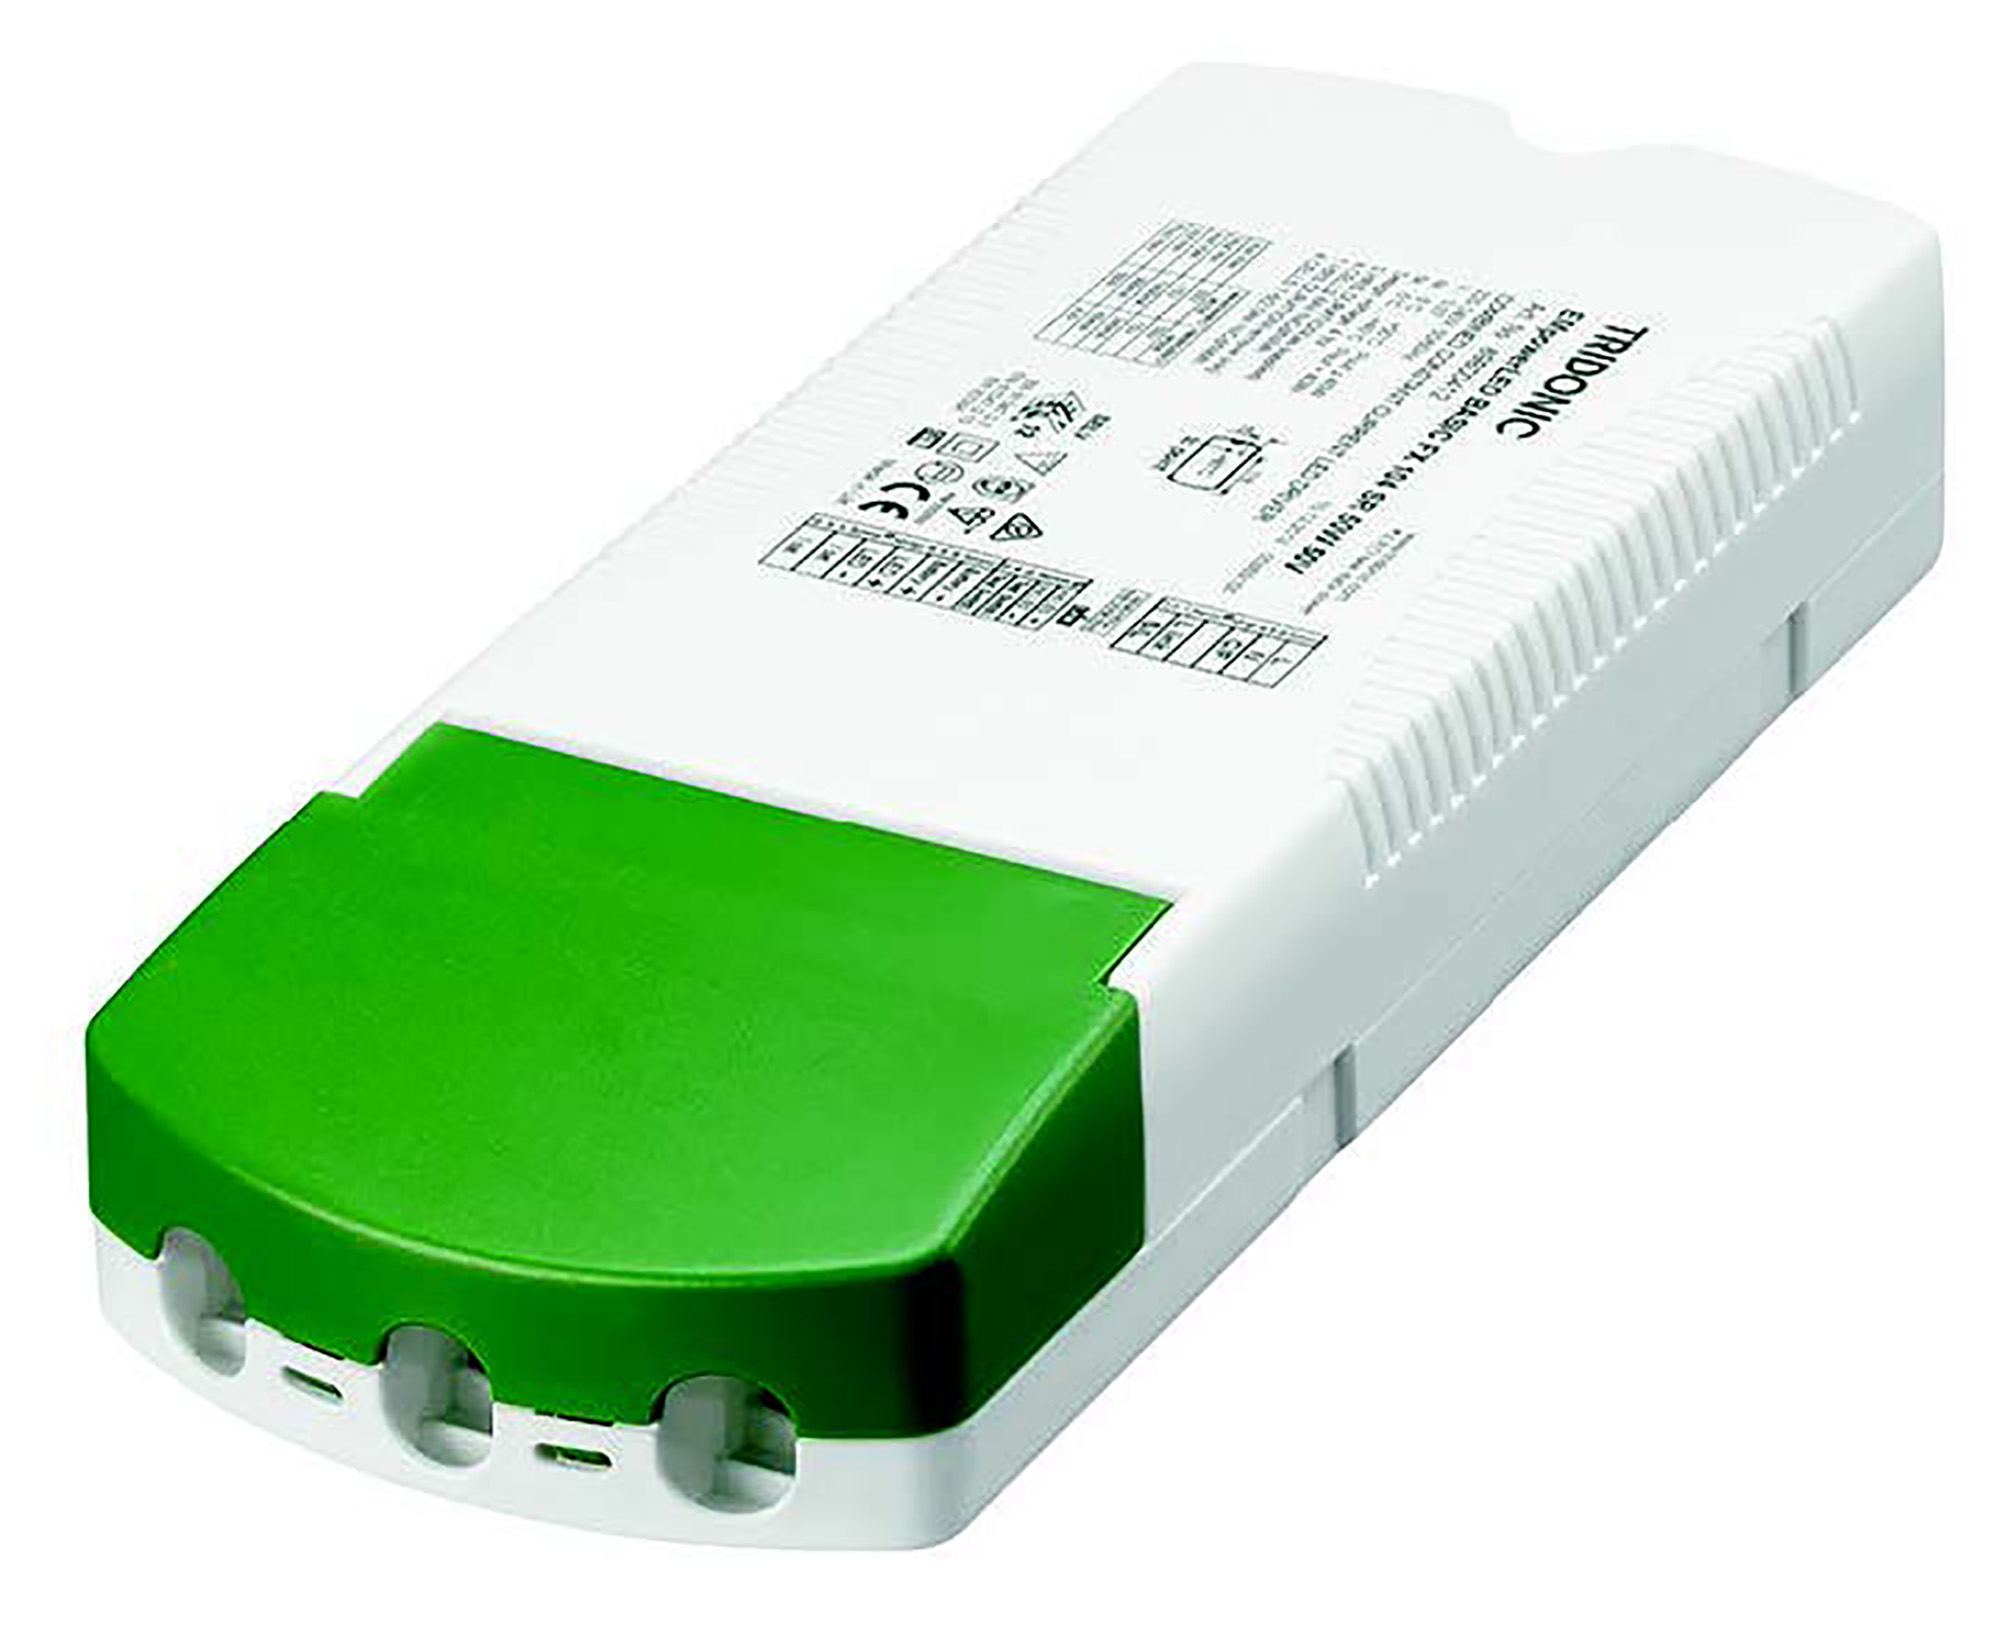 89800430  EMpowerLED 50W 50V, Emergency Unit For Compact LED